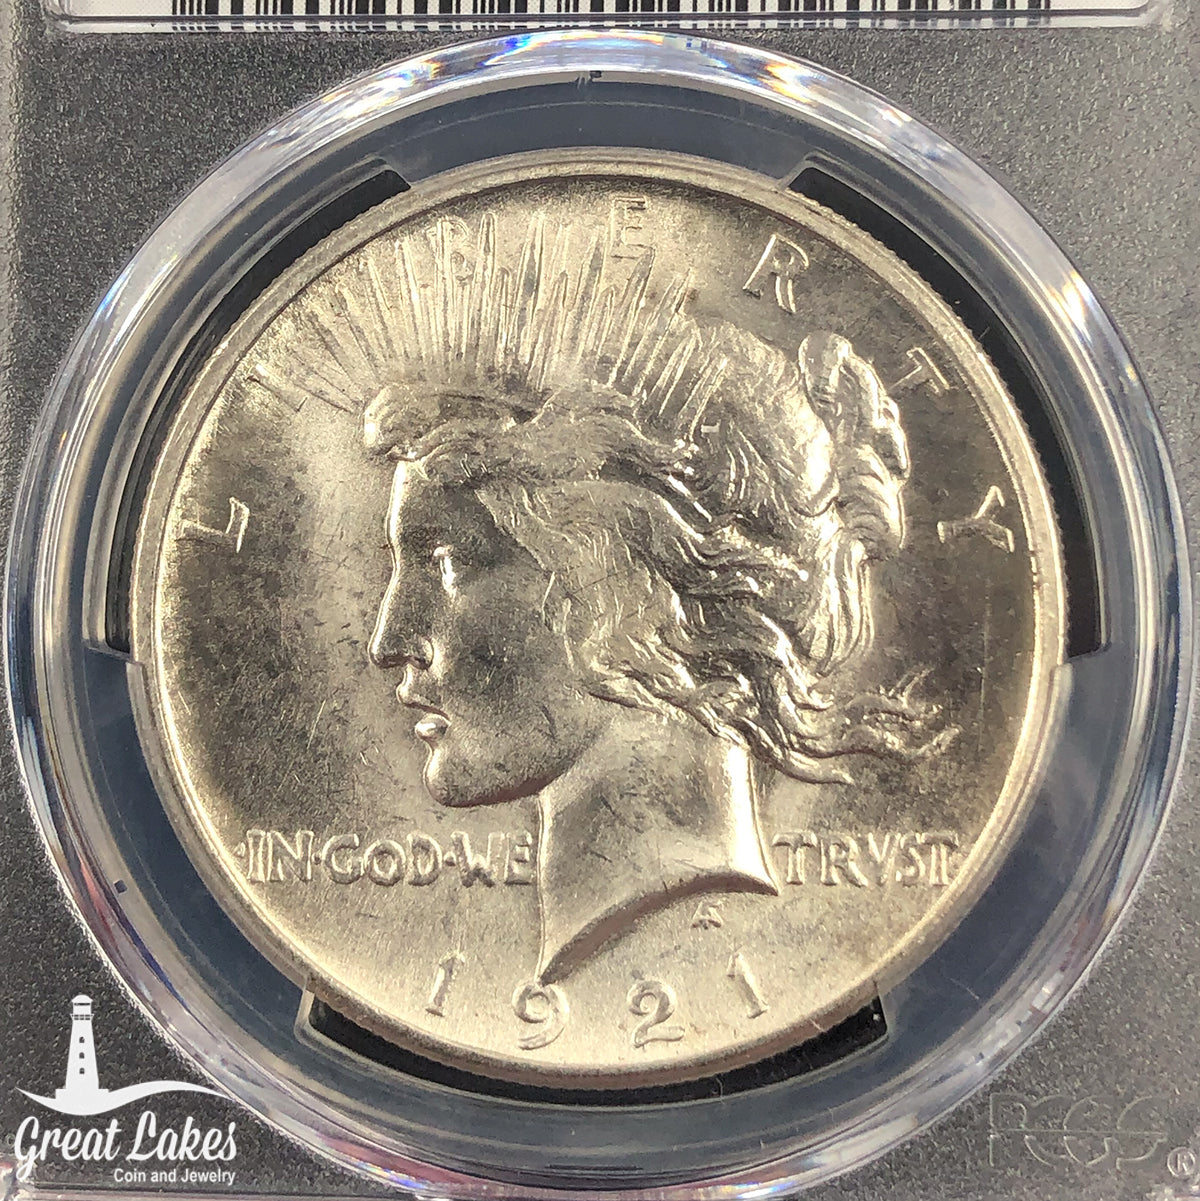 1921 Peace Silver Dollar High Relief PCGS MS65 CAC